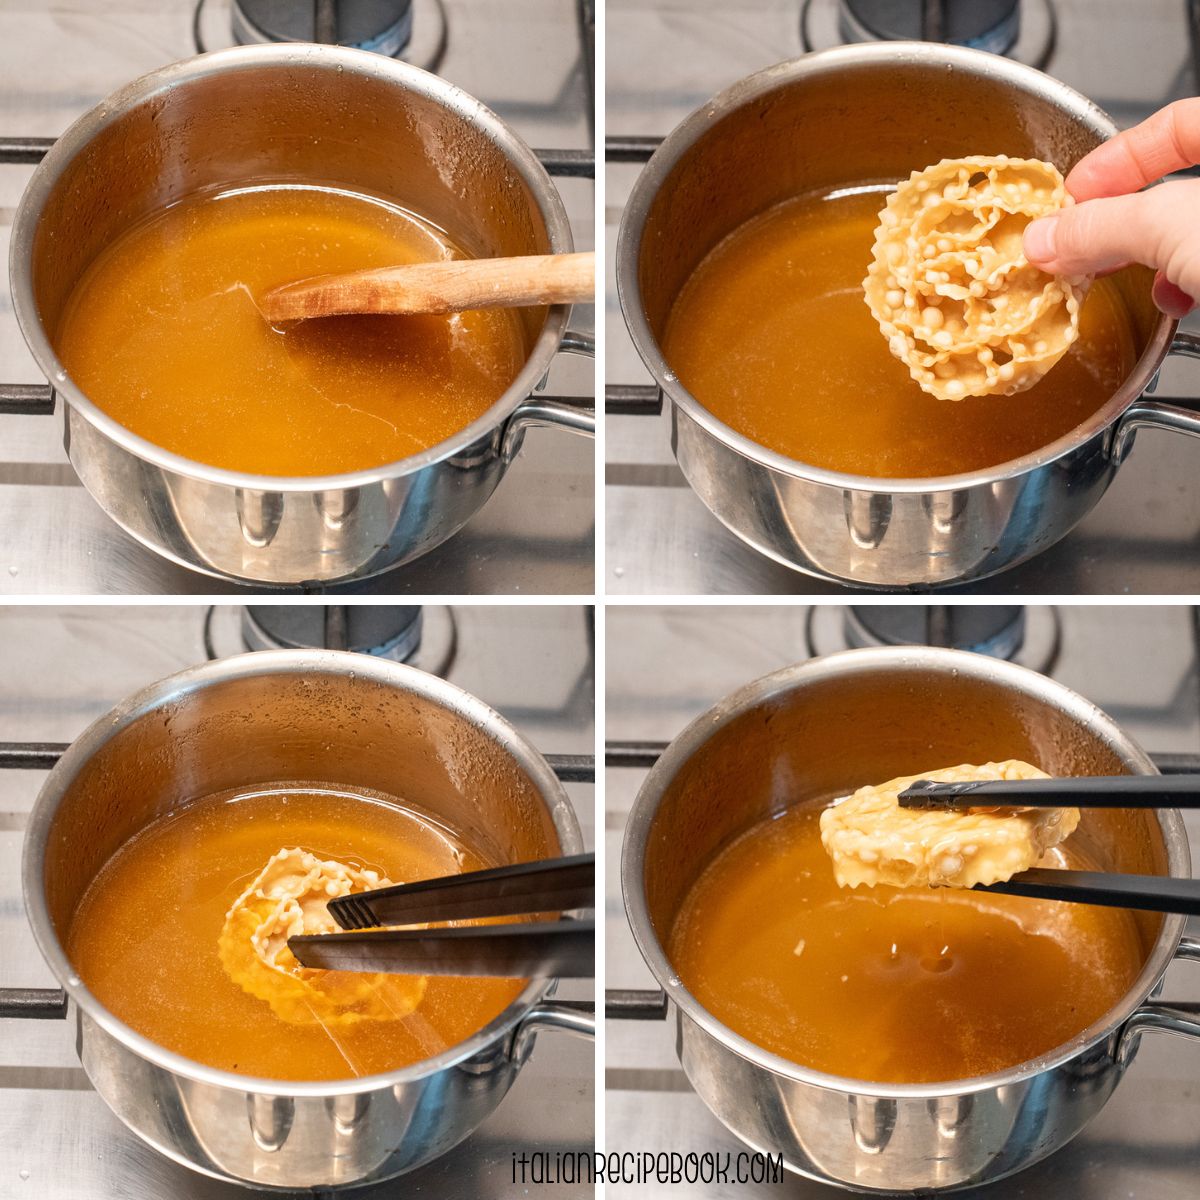 dipping cartellate in honey